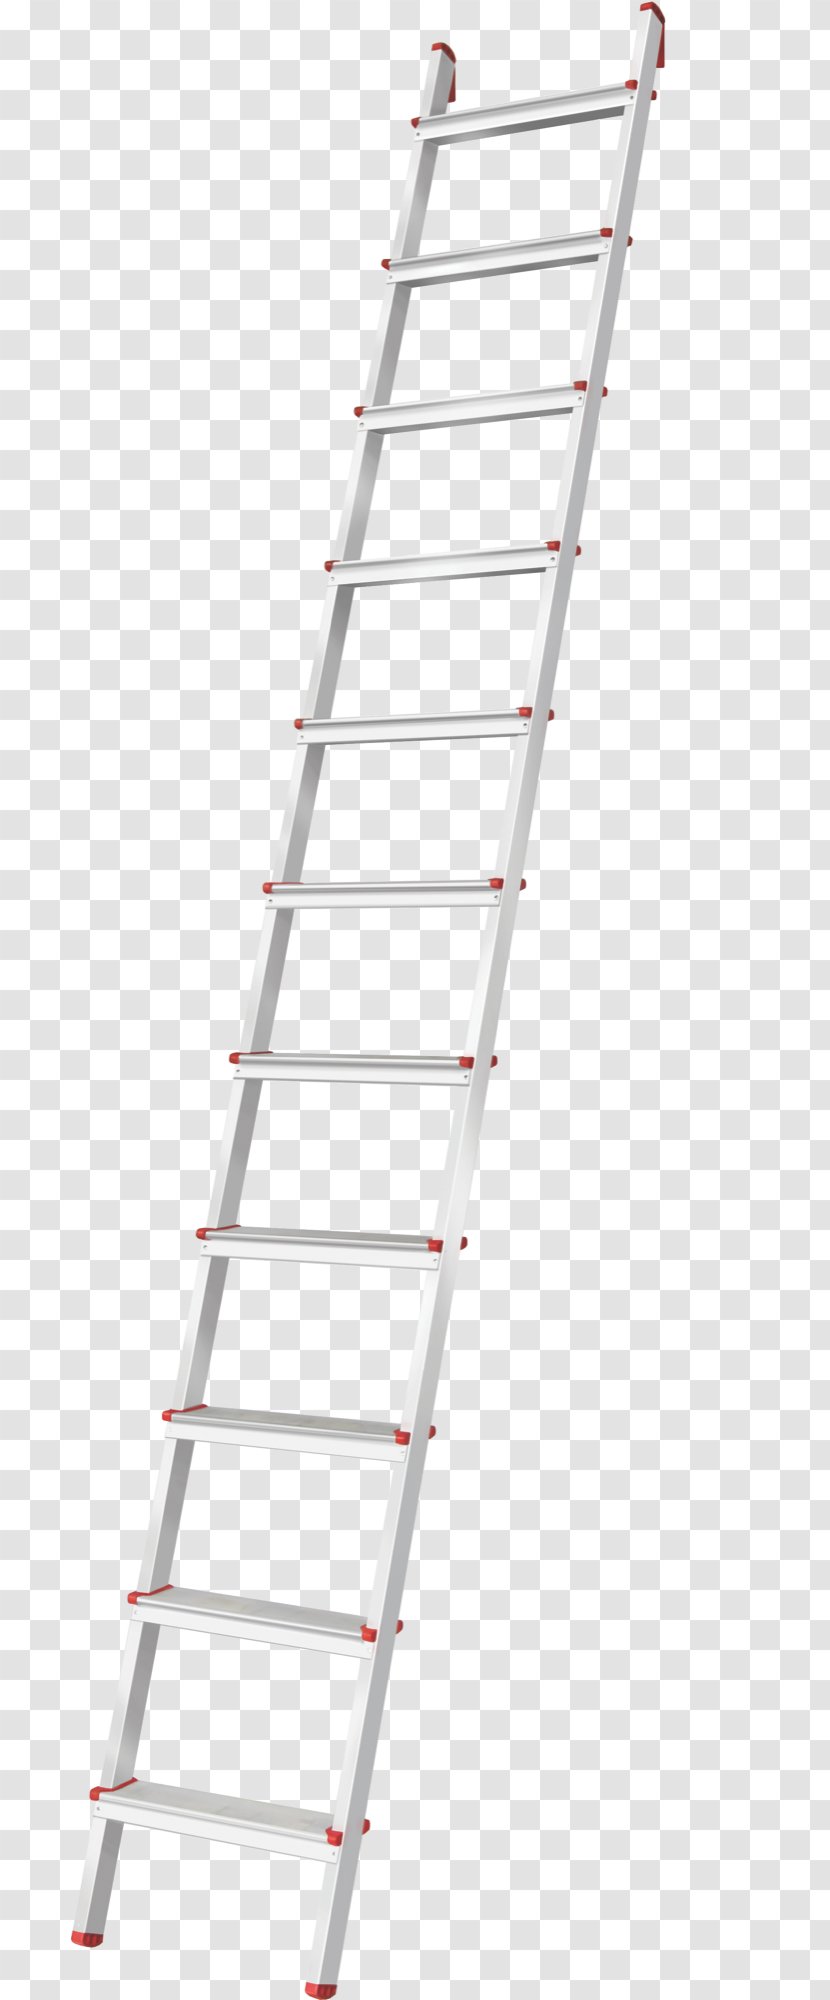 Hailo Combi Ladder 3 Section Capacity 150kg Rungs And Stairs Height Tool - Wood Transparent PNG